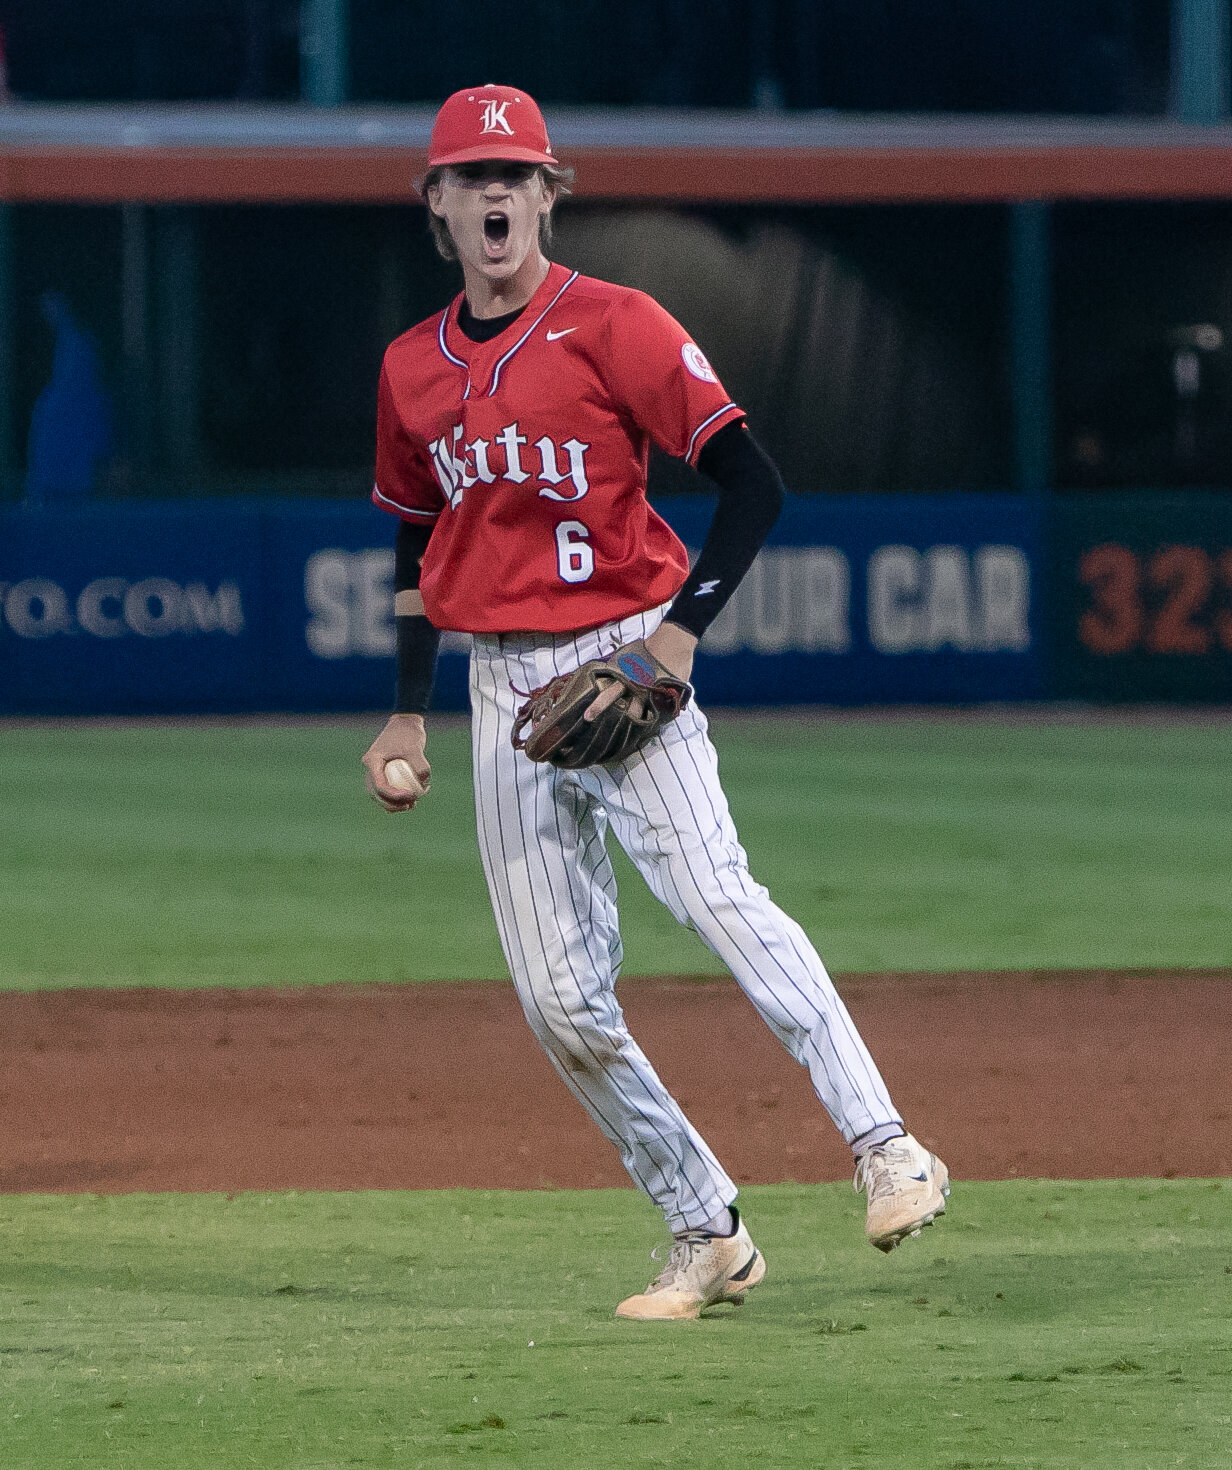 Josh Dunayczan celebrates after making a play during Friday's Regional Final between Katy and Pearland at Constellation Field in Sugar Land.